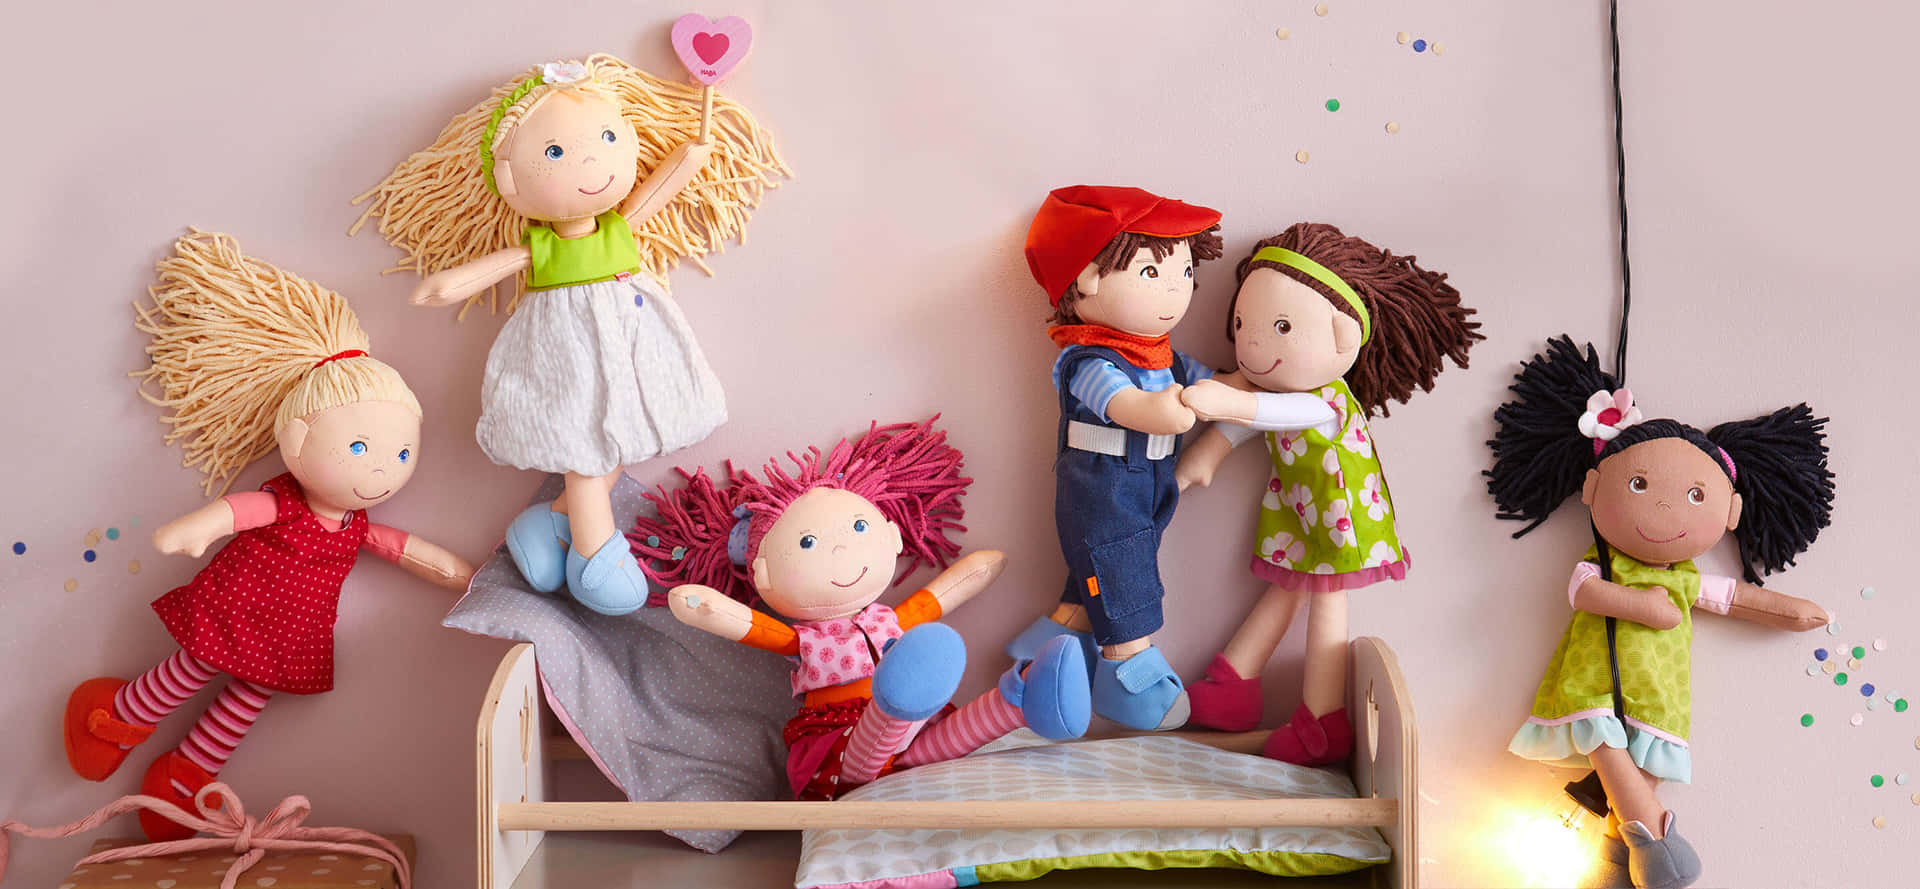 A Group Of Stuffed Dolls In A Room